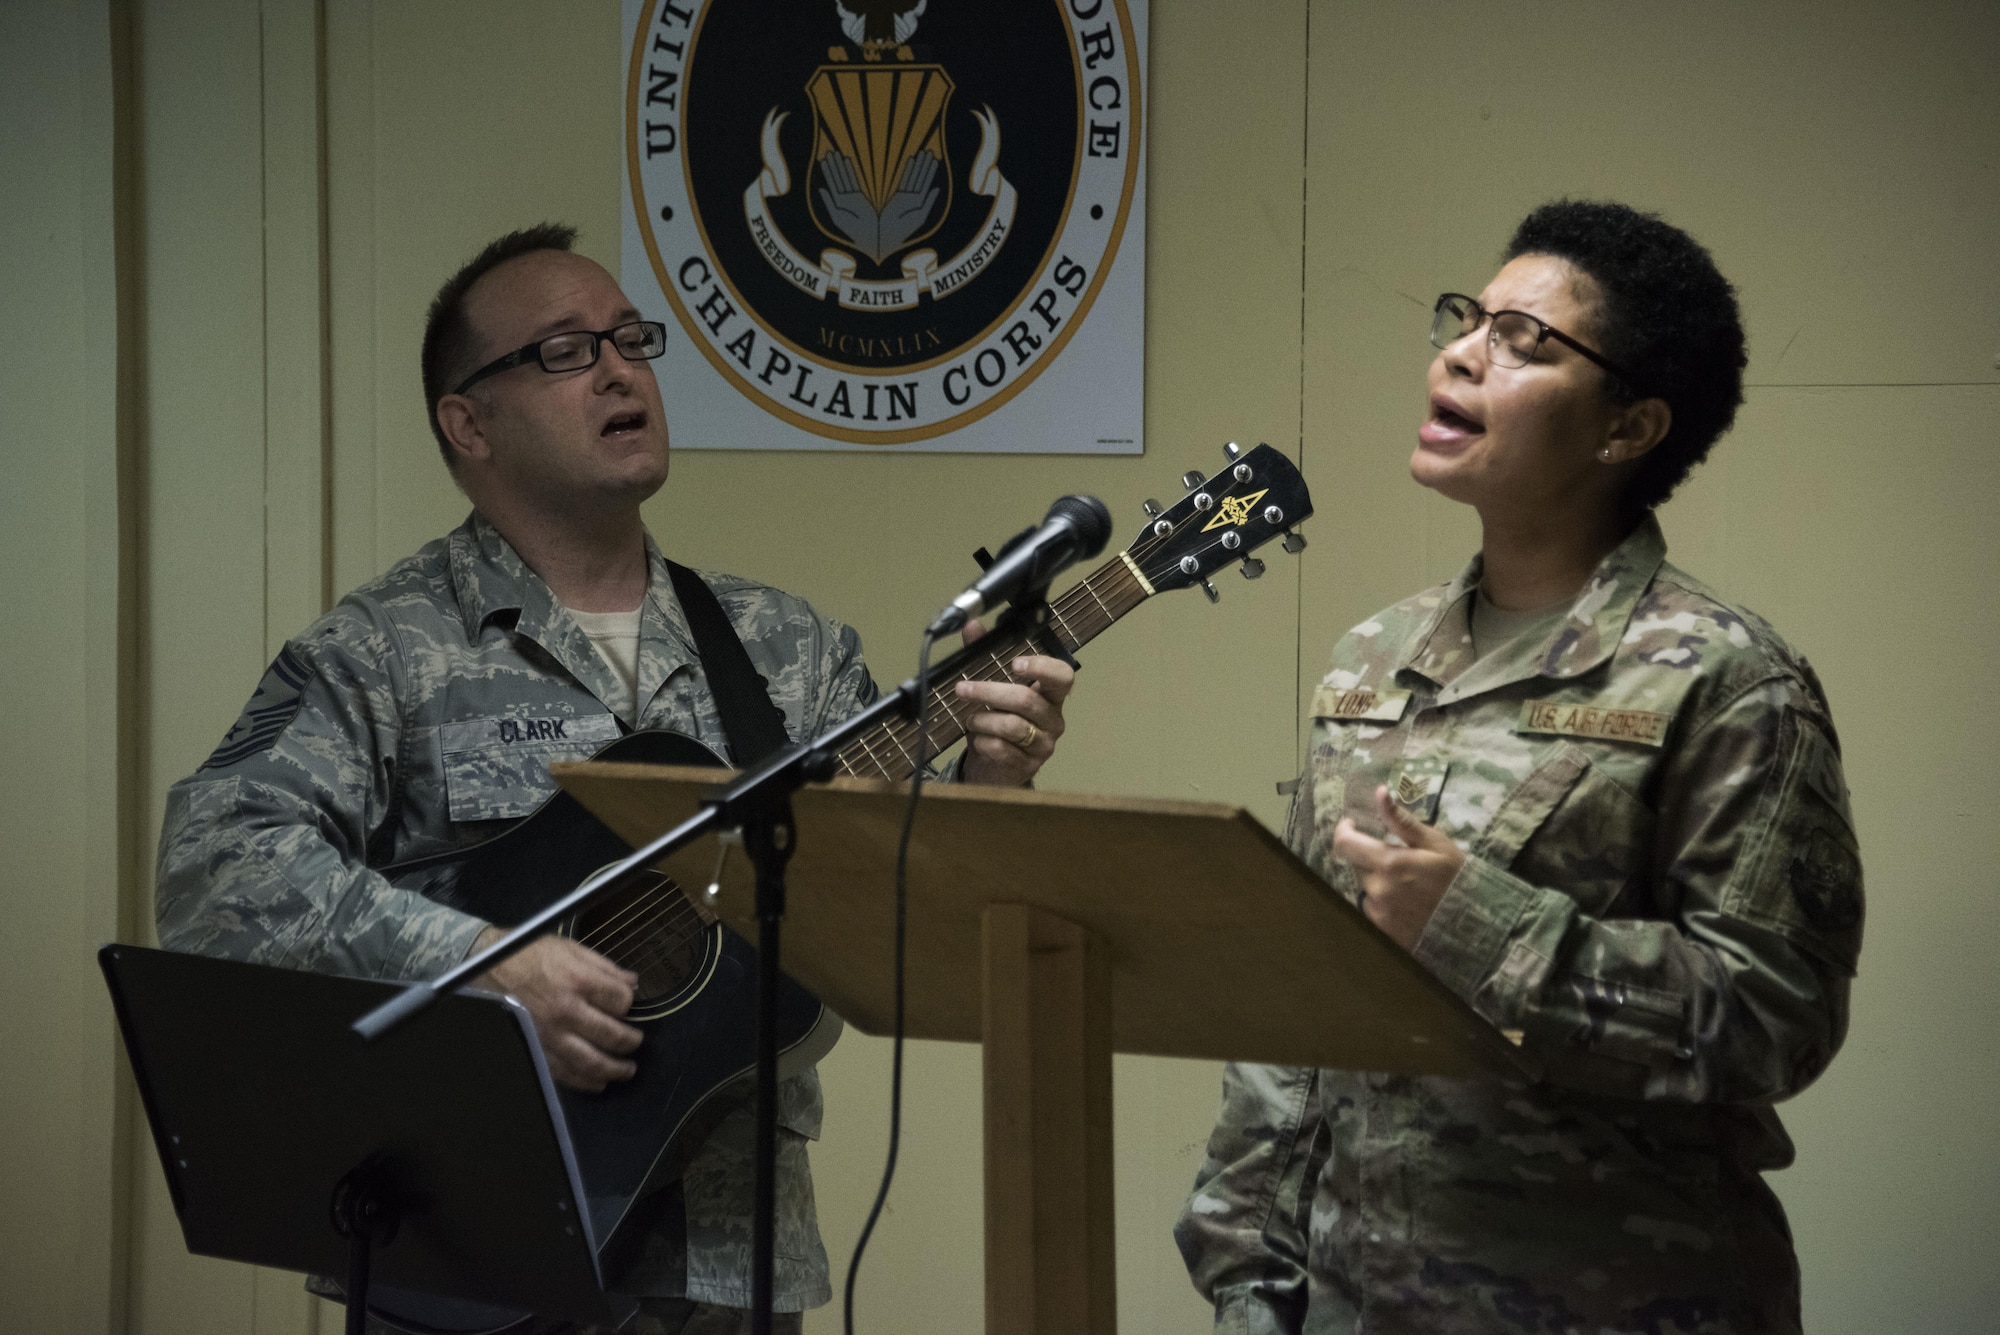 Senior Master Sgt. Robert Clark, a 386th Expeditionary Aircraft Maintenance Squadron first sergeant, and Staff Sgt. Mikele Long, a 386th Expeditionary Security Forces Squadron member, perform their rendition of “Undescribable” during a Faith Works leadership luncheon, at an undisclosed location in Southwest Asia, May 4, 2017. The U.S. Air Force Chaplain Corps recently rolled out the Faith Works campaign to inform Airmen about the overwhelming evidence regarding the positive relationship between spirituality, religion, and health. (U.S. Air Force photo/ Tech. Sgt. Jonathan Hehnly)